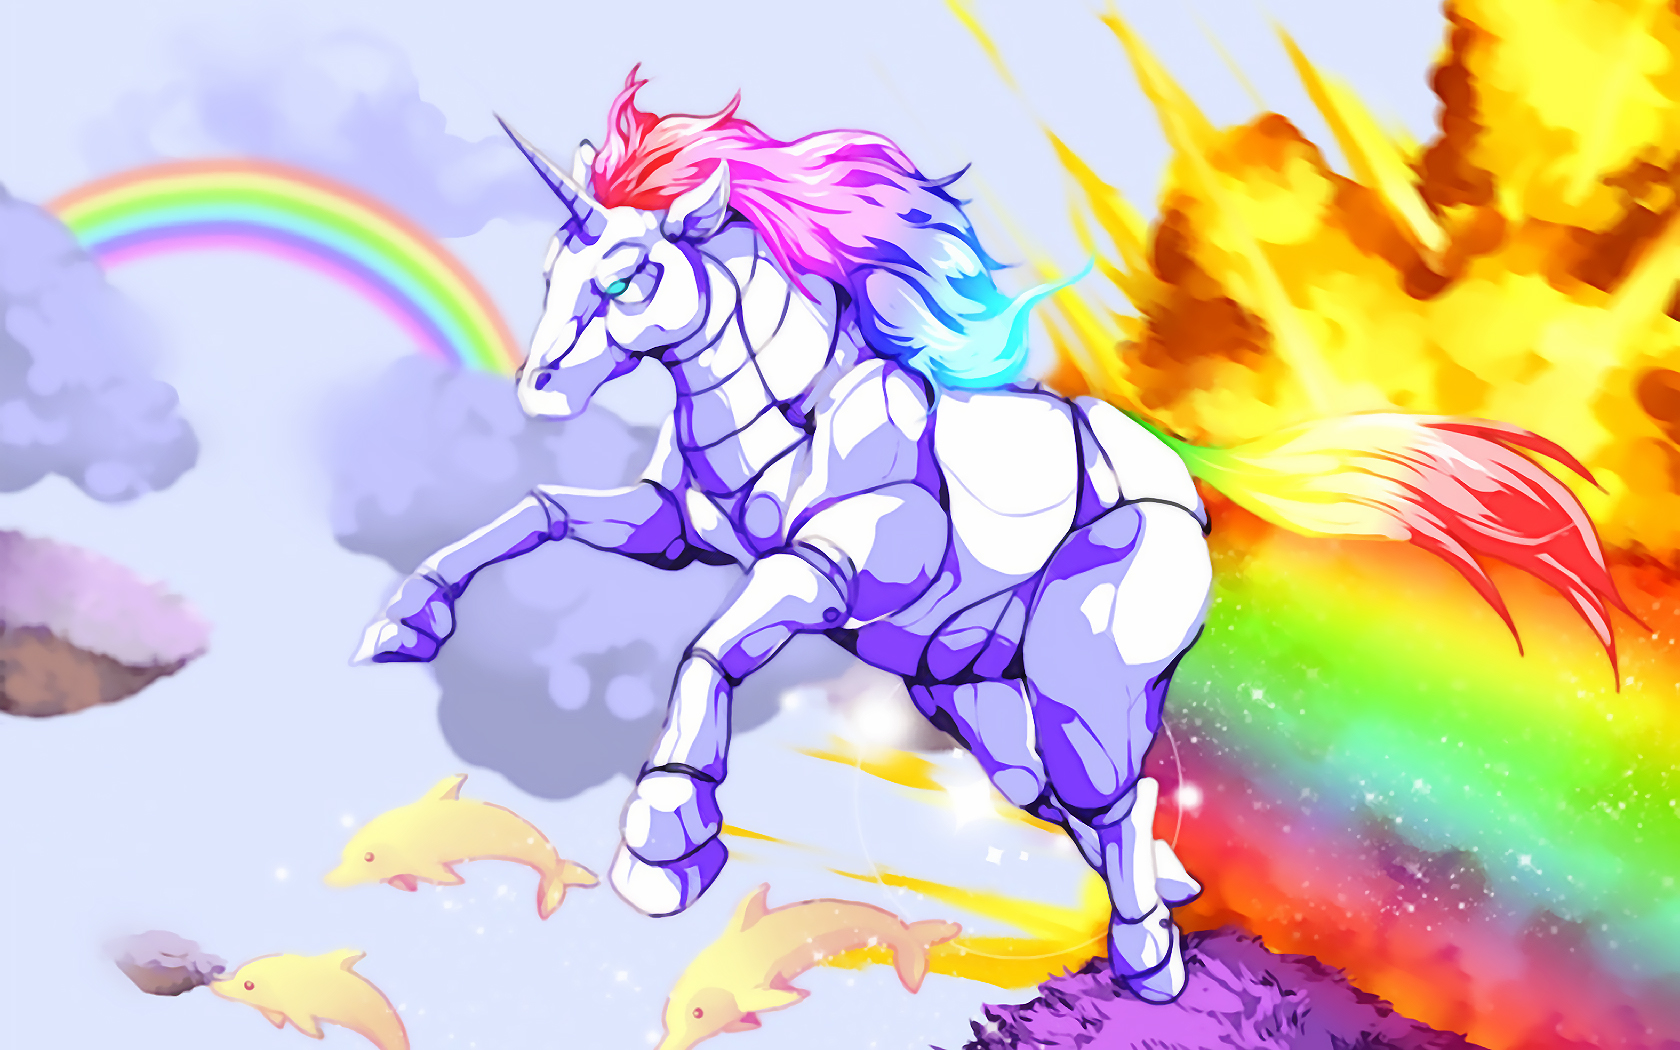 Video Game Robot Unicorn Attack HD Wallpaper | Background Image